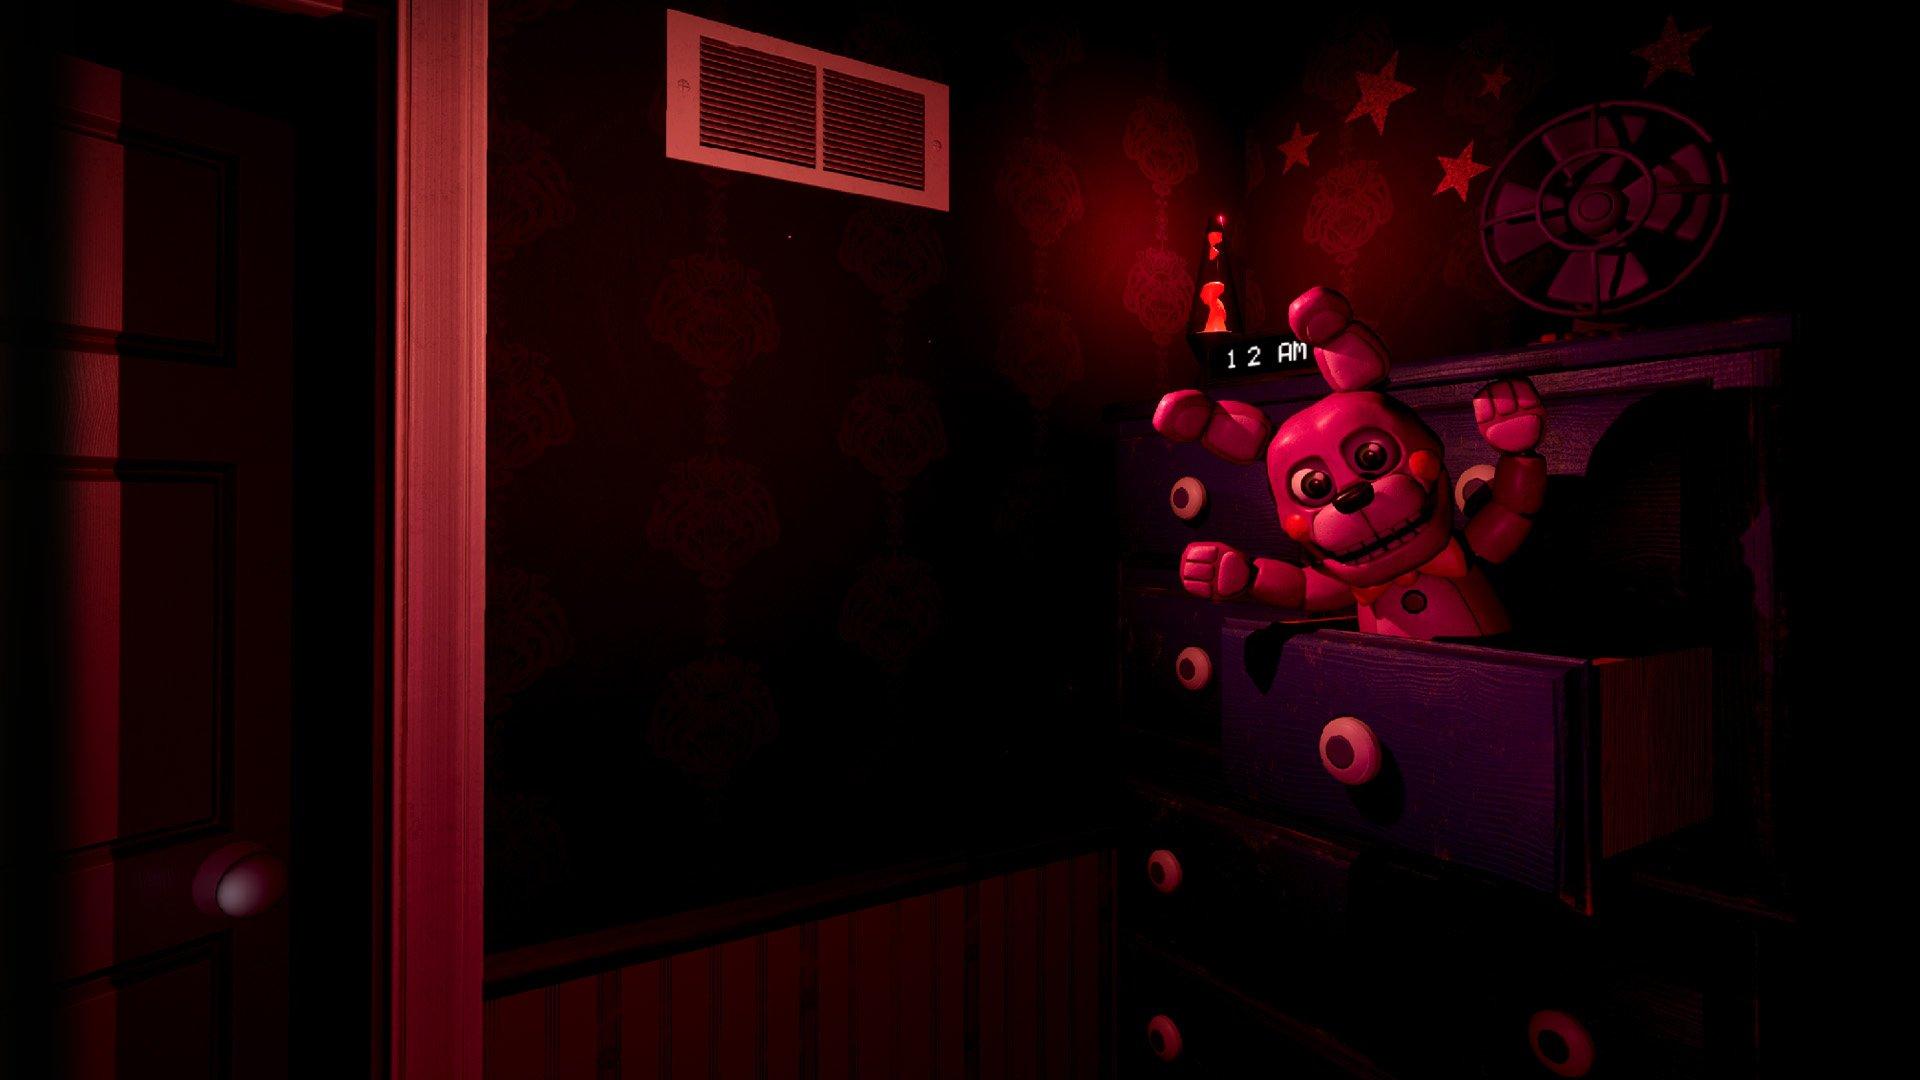 Five Nights at Freddy's: Help Wanted - Nintendo Switch